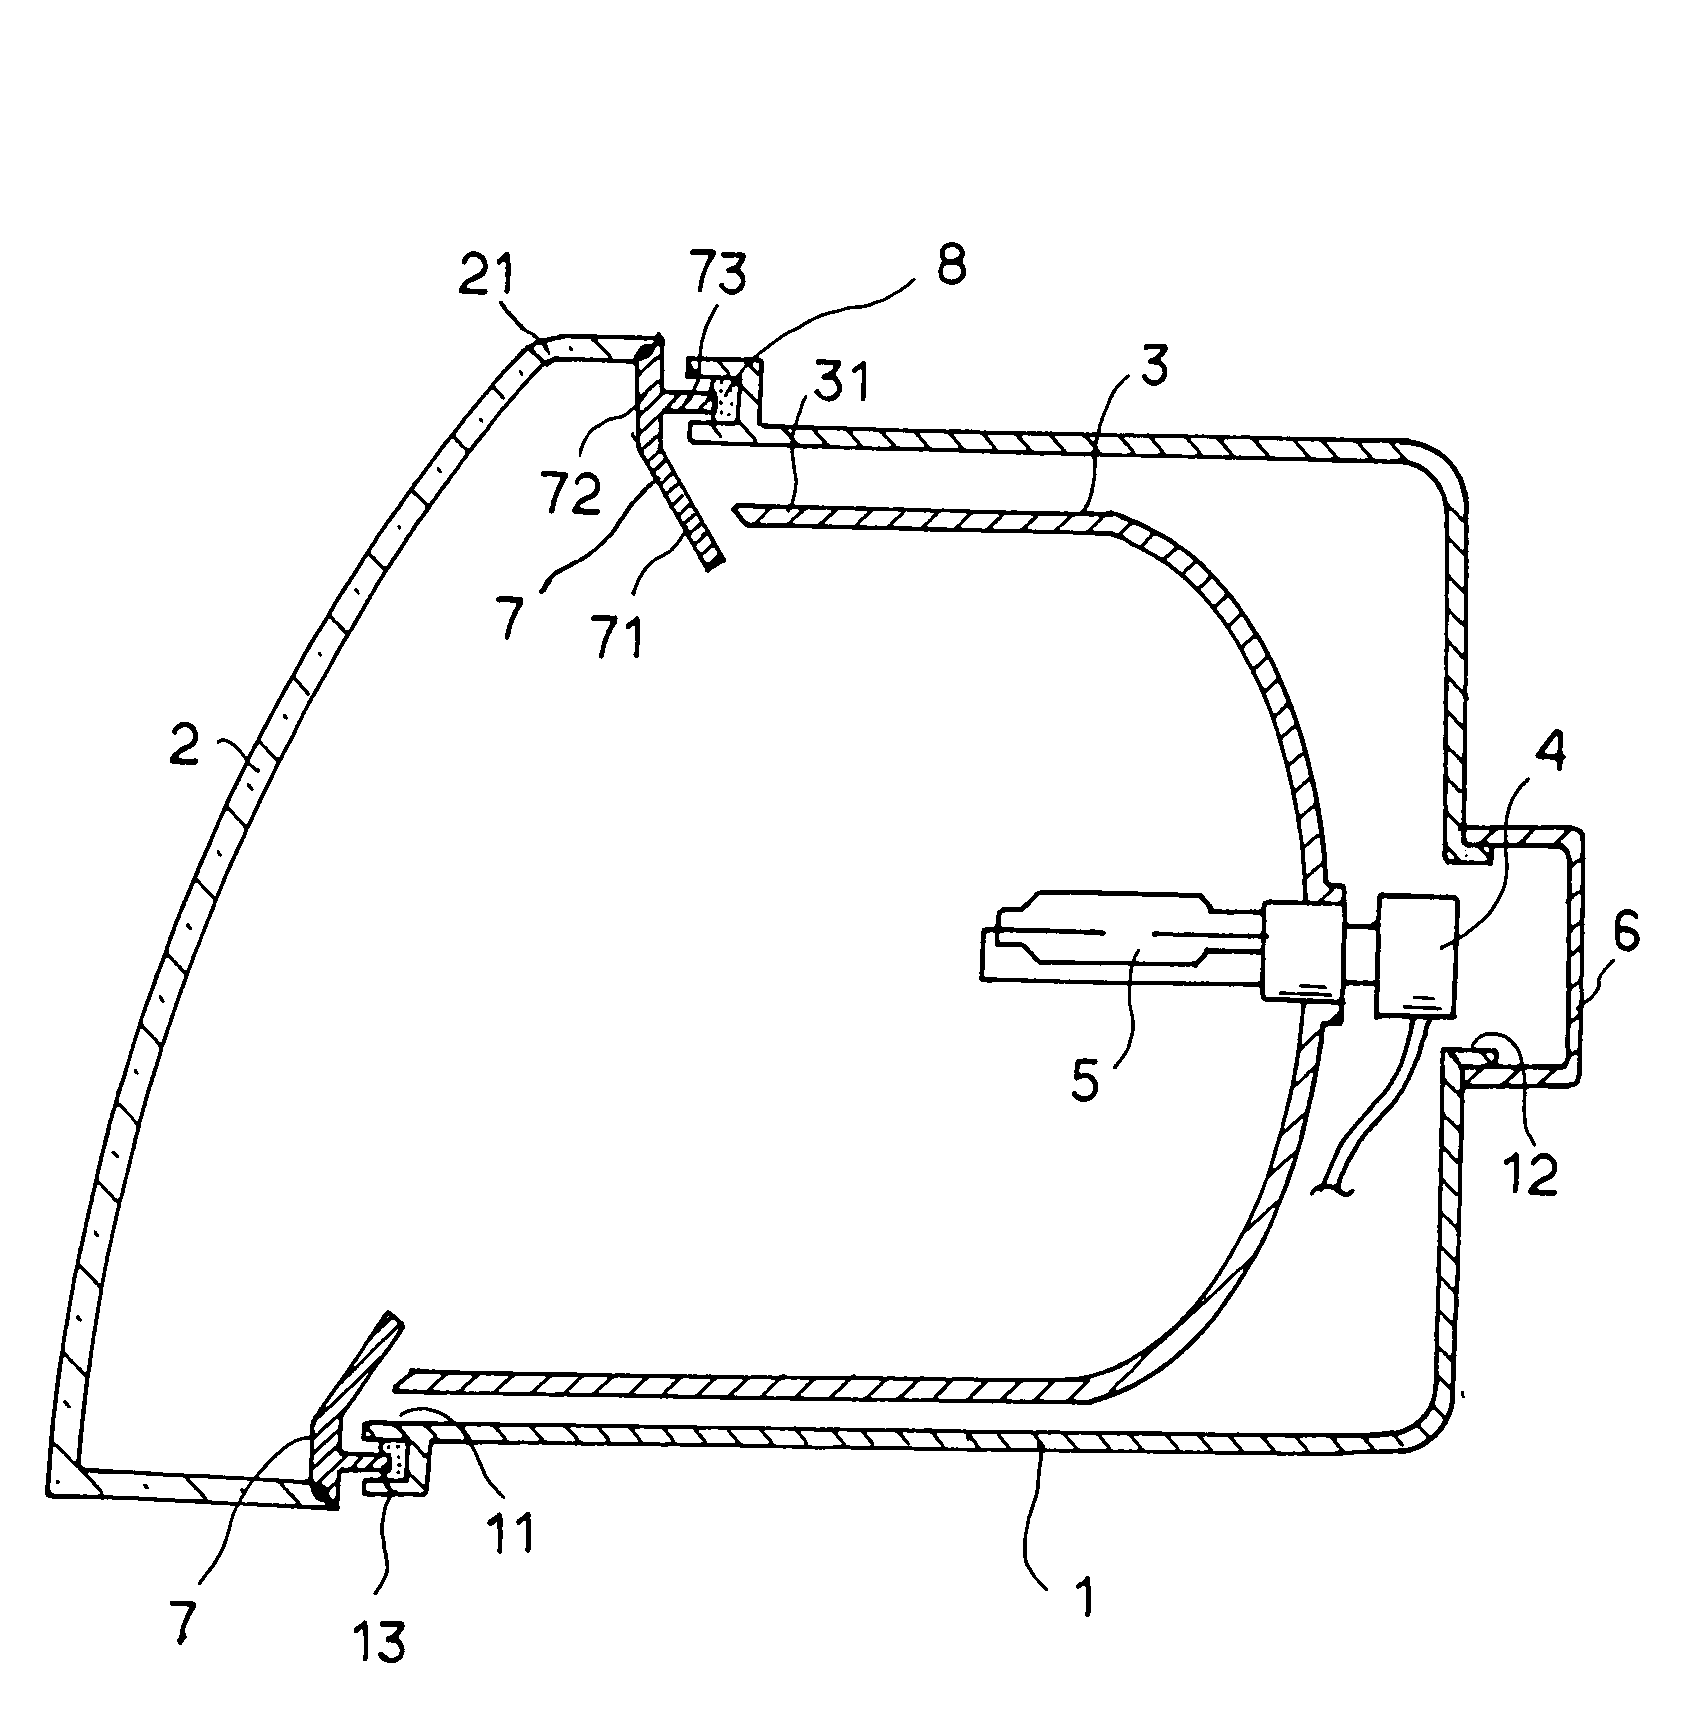 Vehicular lamp having a removable lens with an extension reflector